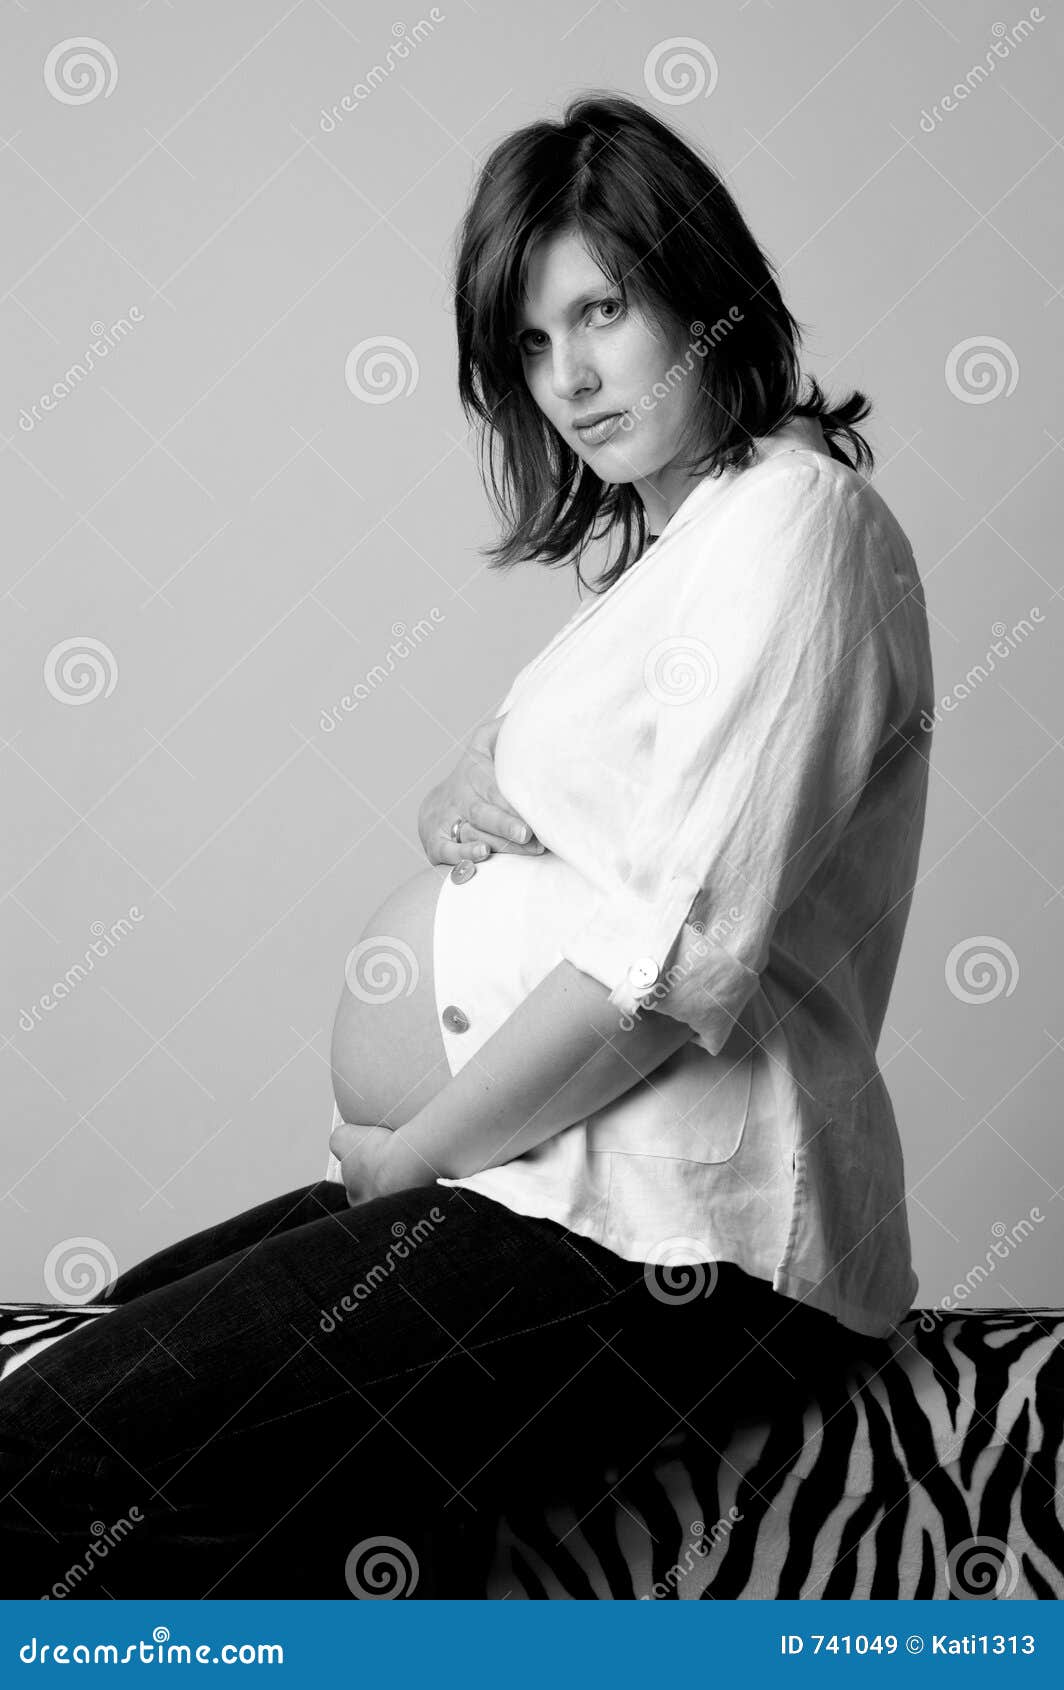 Pregnant Wallpapers High Quality | Download Free